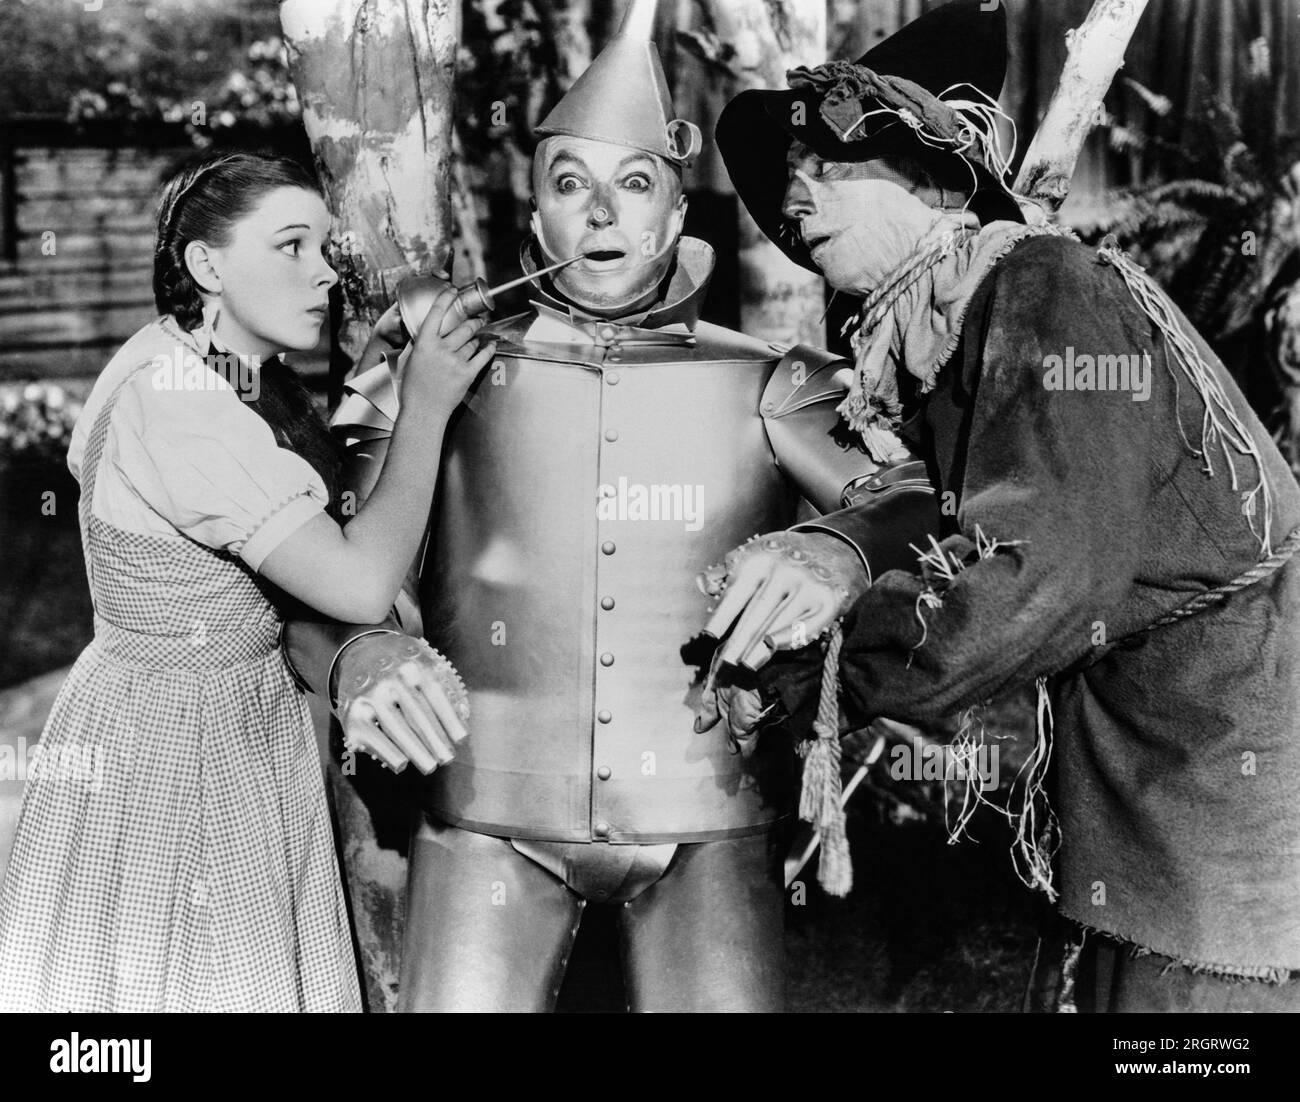 Hollywood, California: c. 1939 A scene from the Wizard of Oz with ...